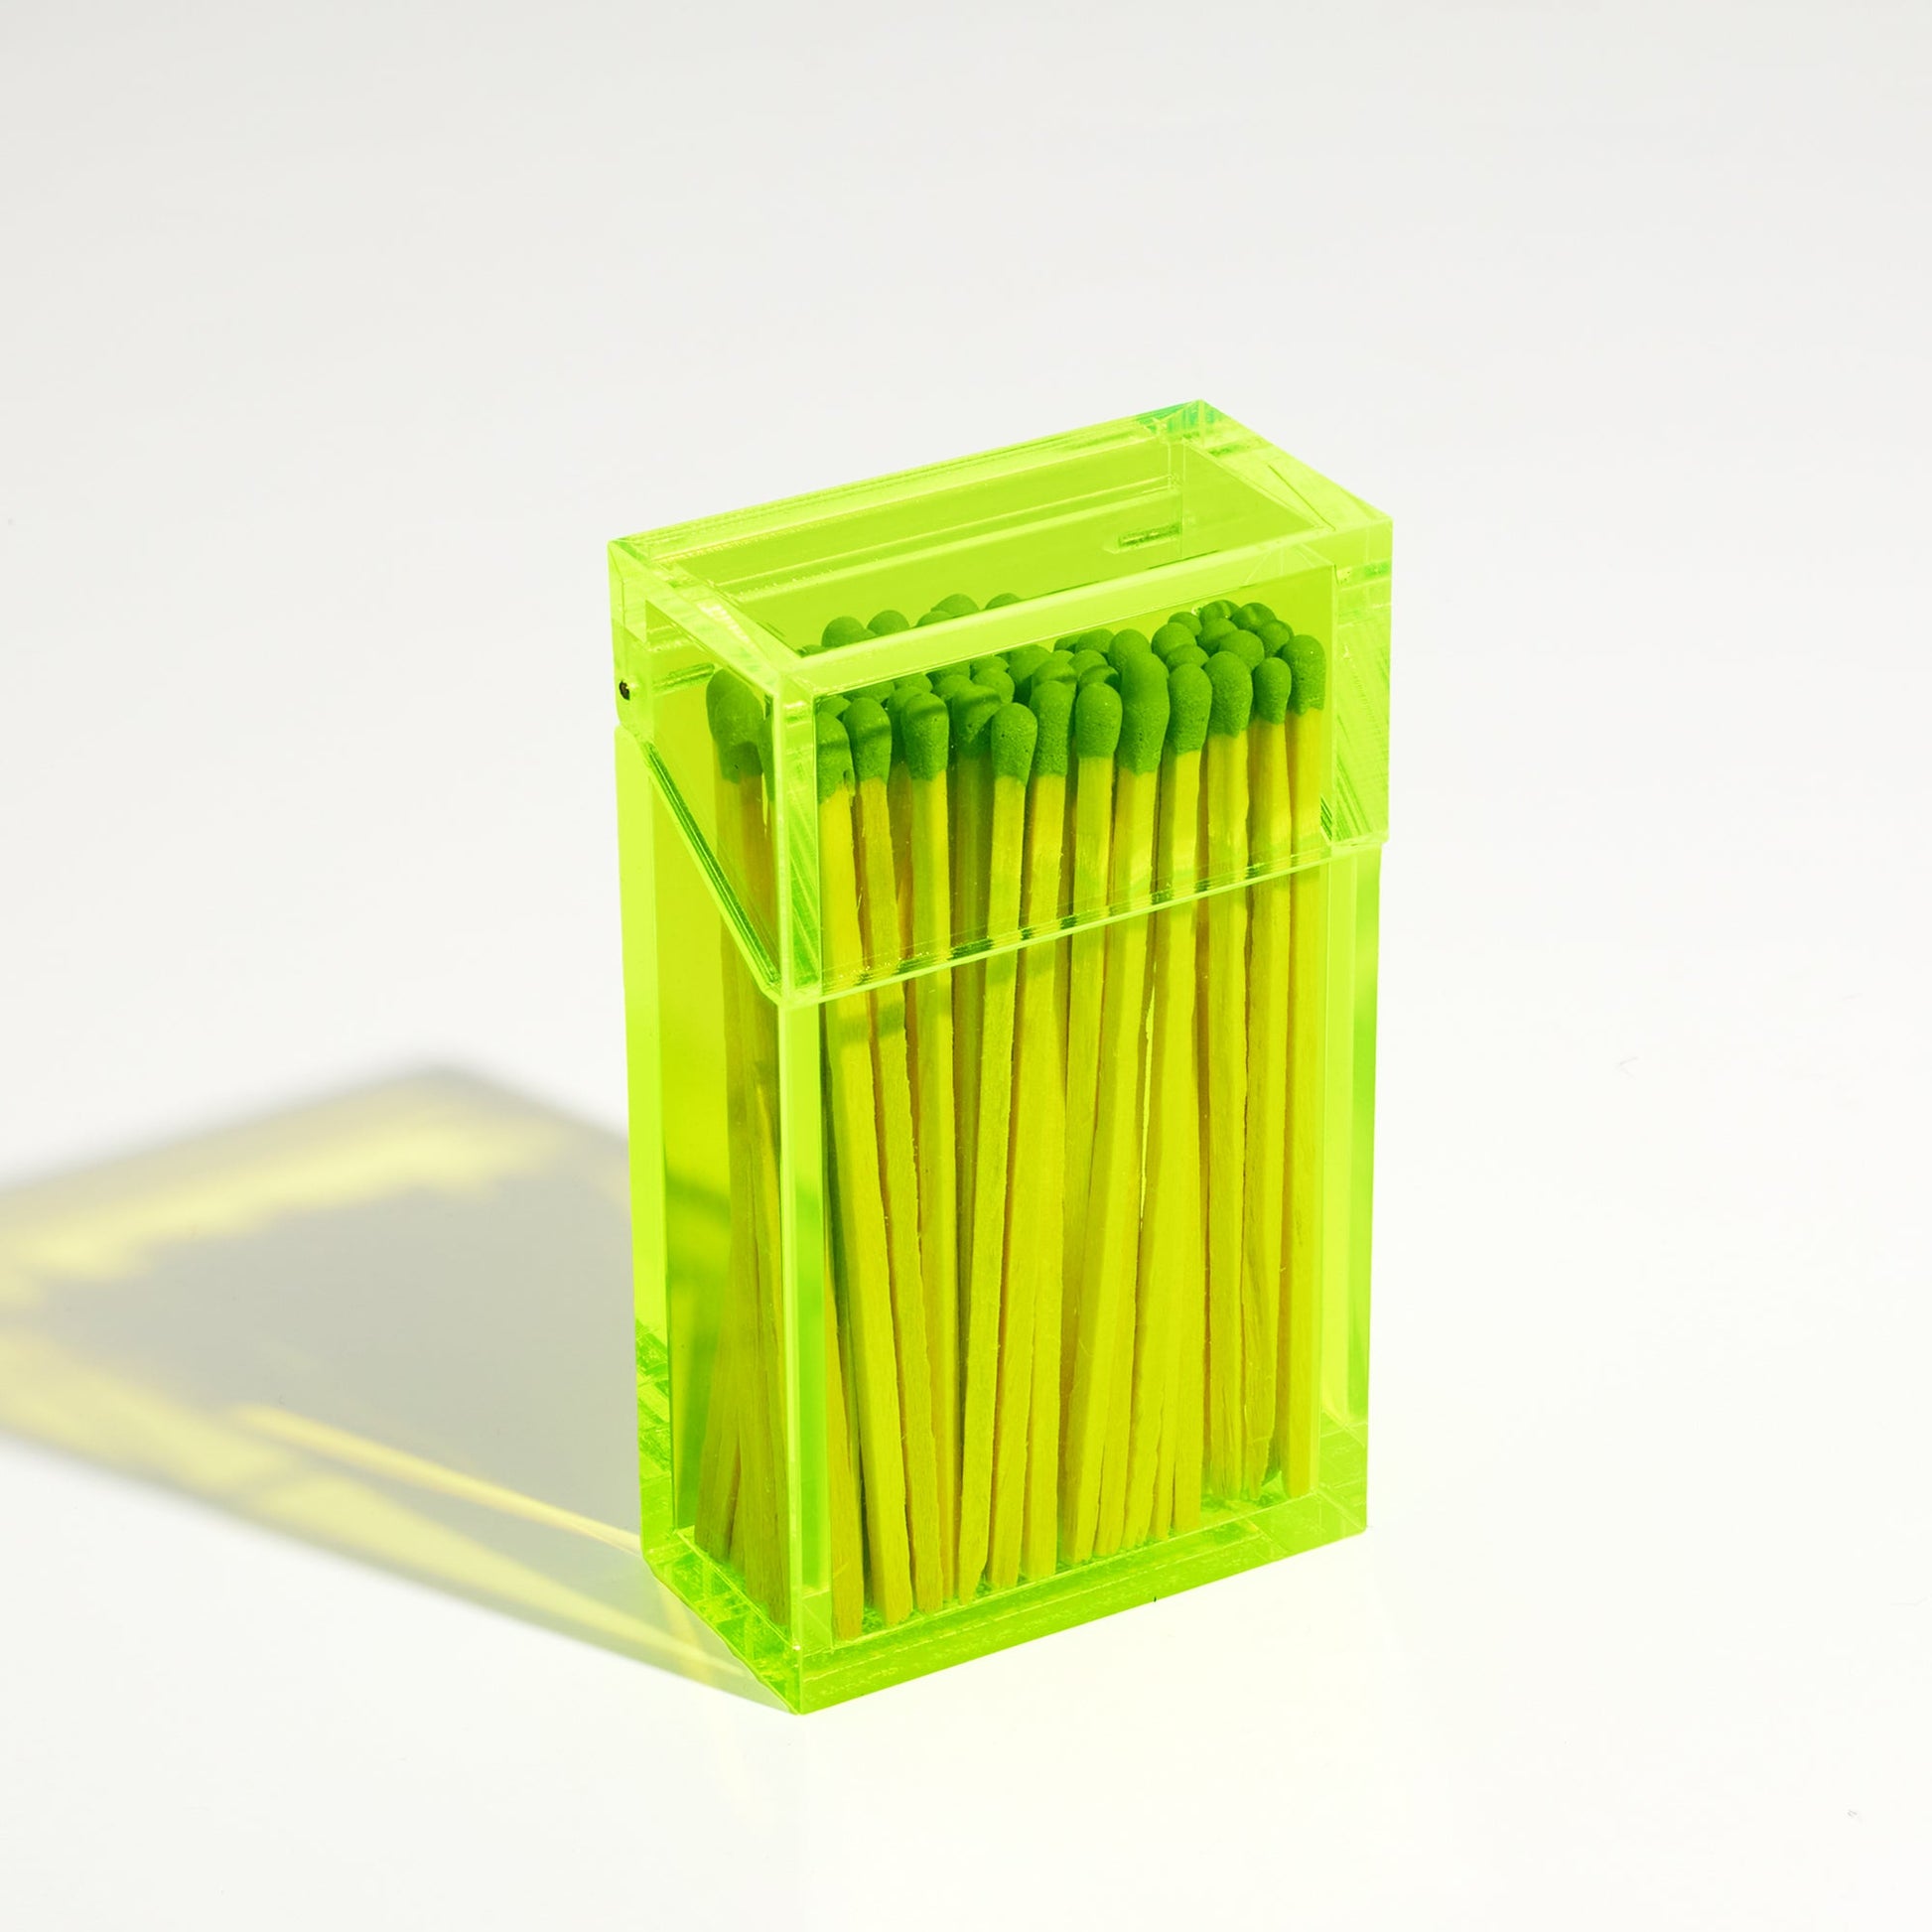 Closed Match holder shaped like a Cigarette Case. Made with neon green acrylic. Case holds Black matches in it.